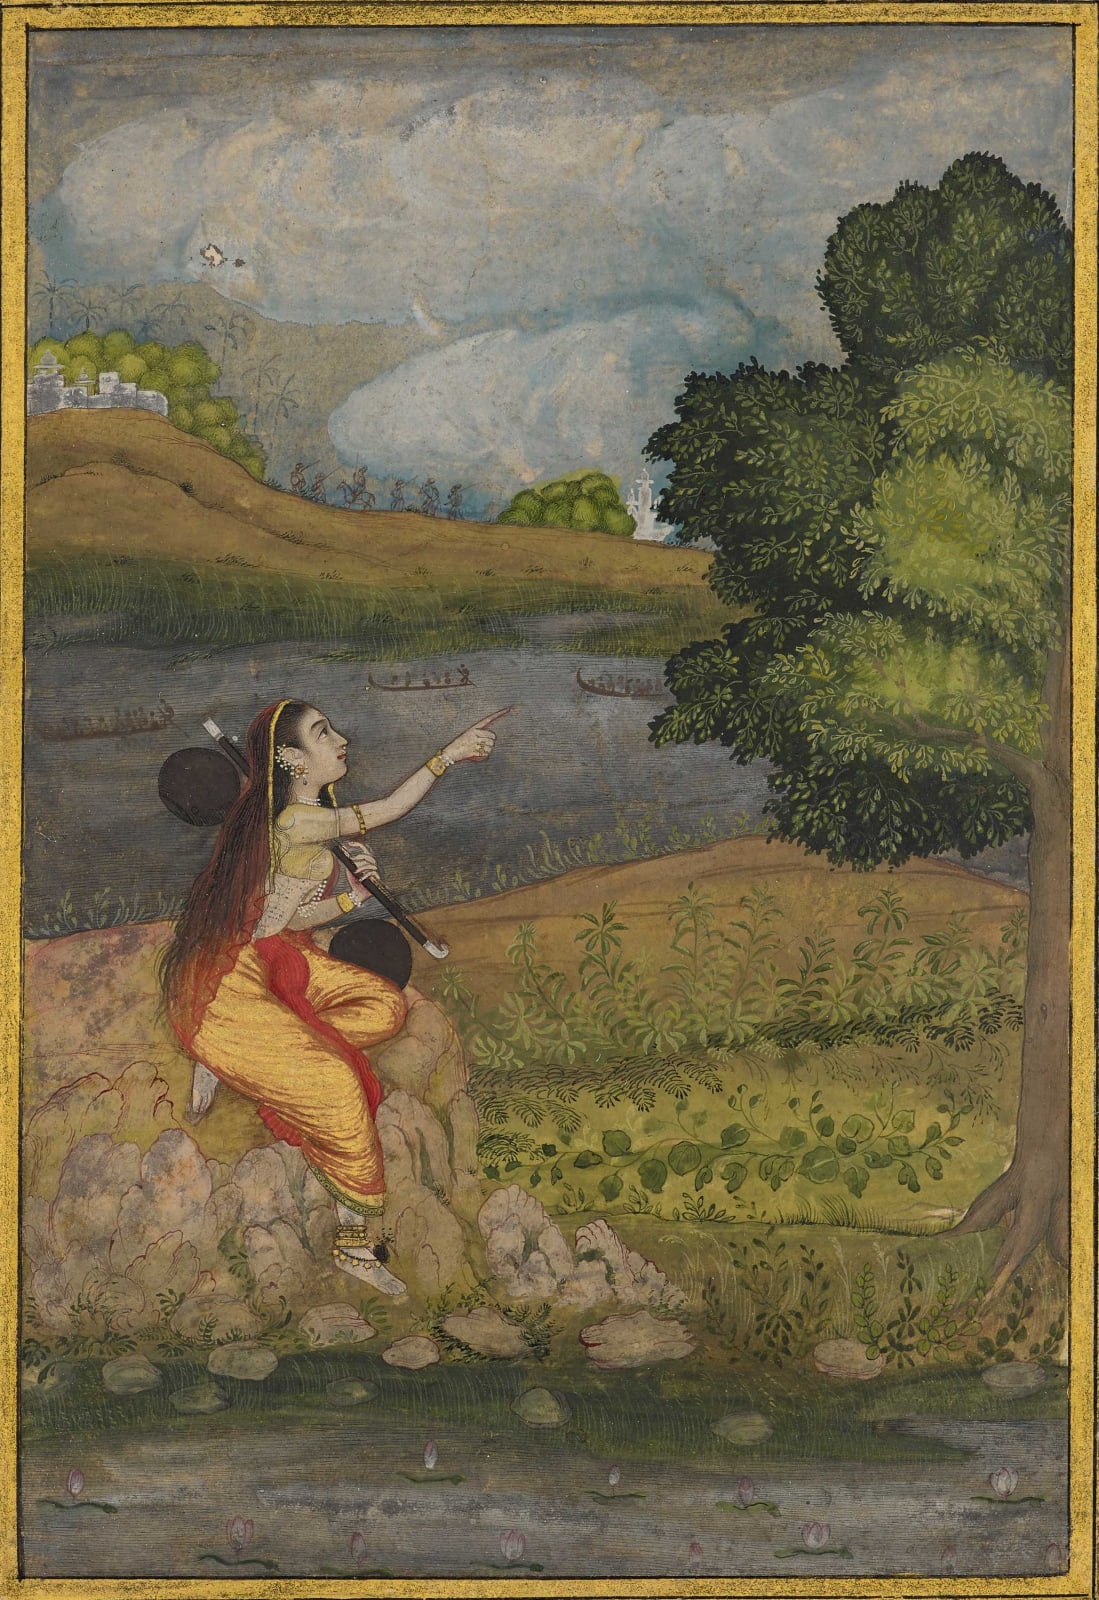 Gujari ragini: Page from a Ragamala series, Mughal style from Rajasthan, possibly from Bikaner, 1670-1700